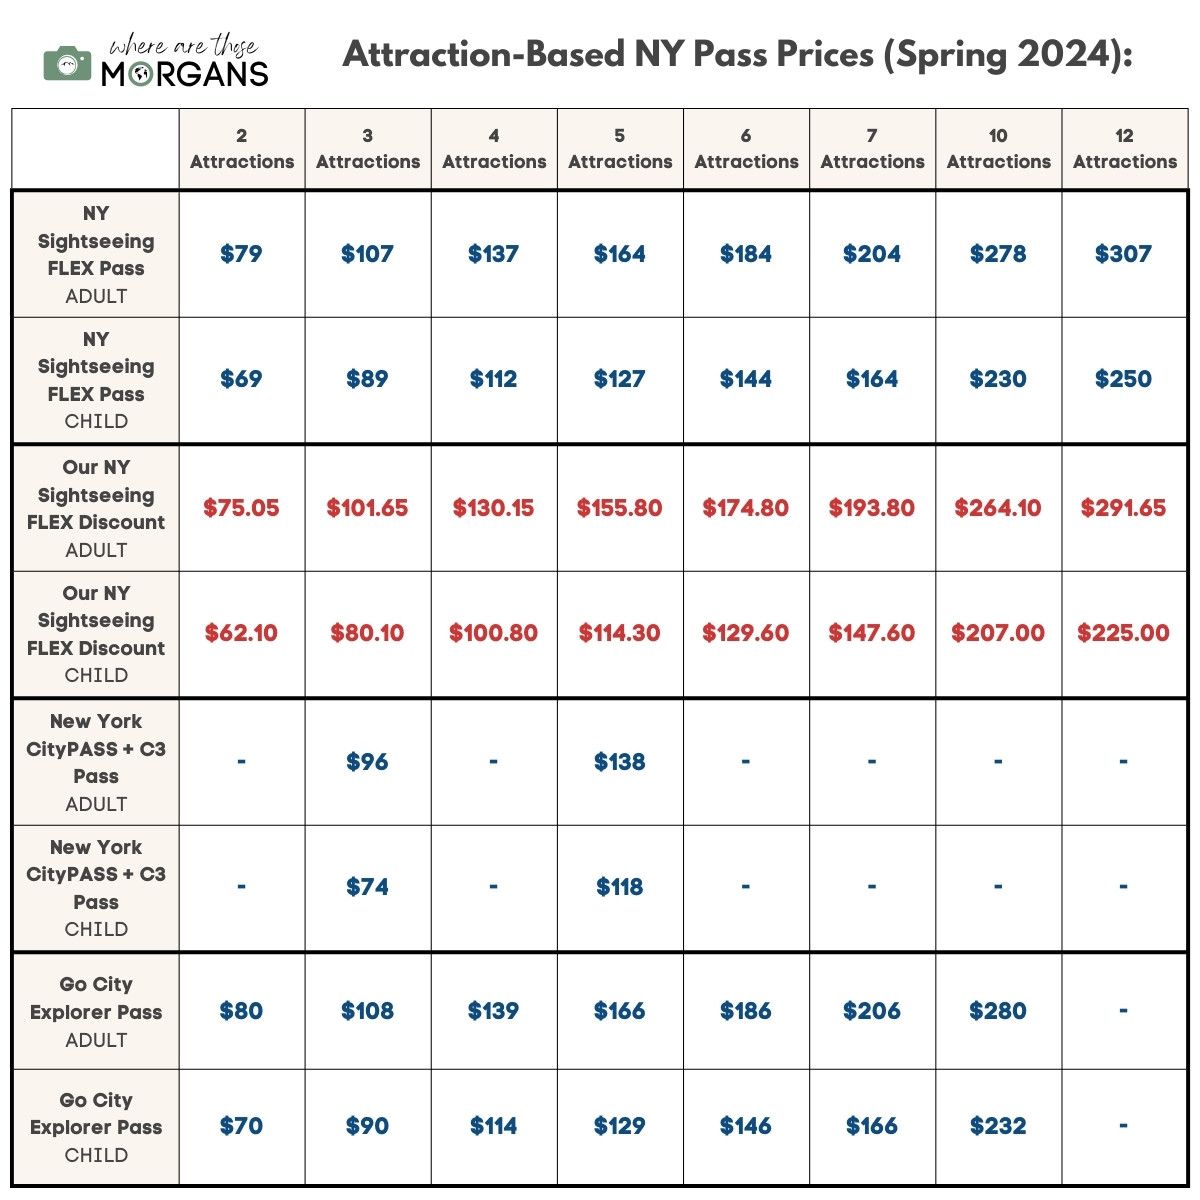 Price comparison for the attraction based NY passes